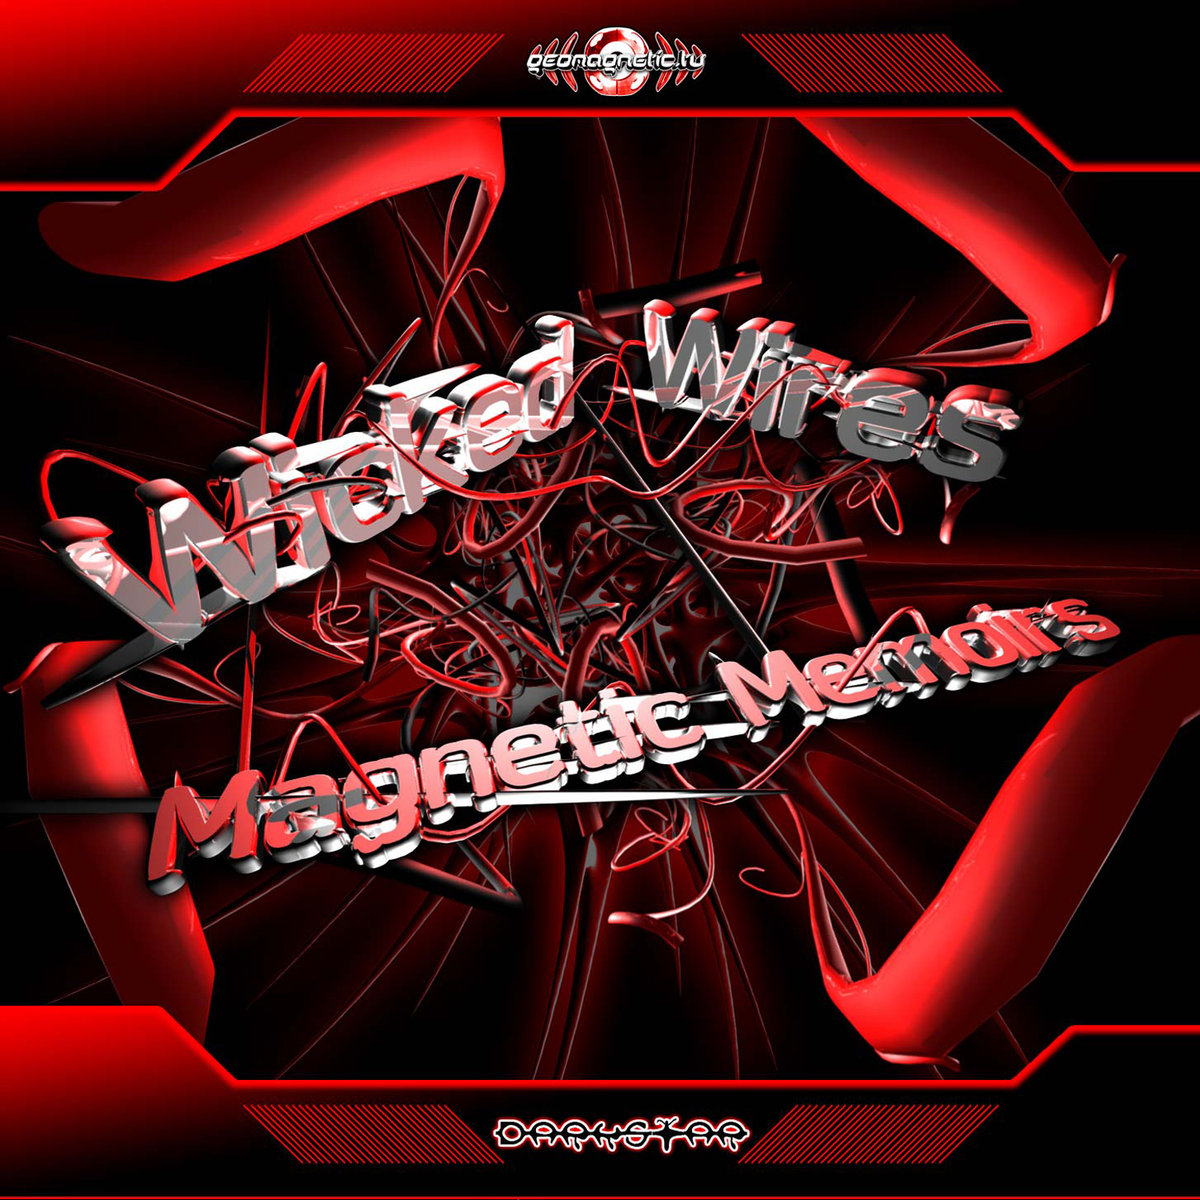 Wicked Wires - Stompers Agony @ 'Wicked Wires - Magnetic Memoirs' album (electronic, goa)